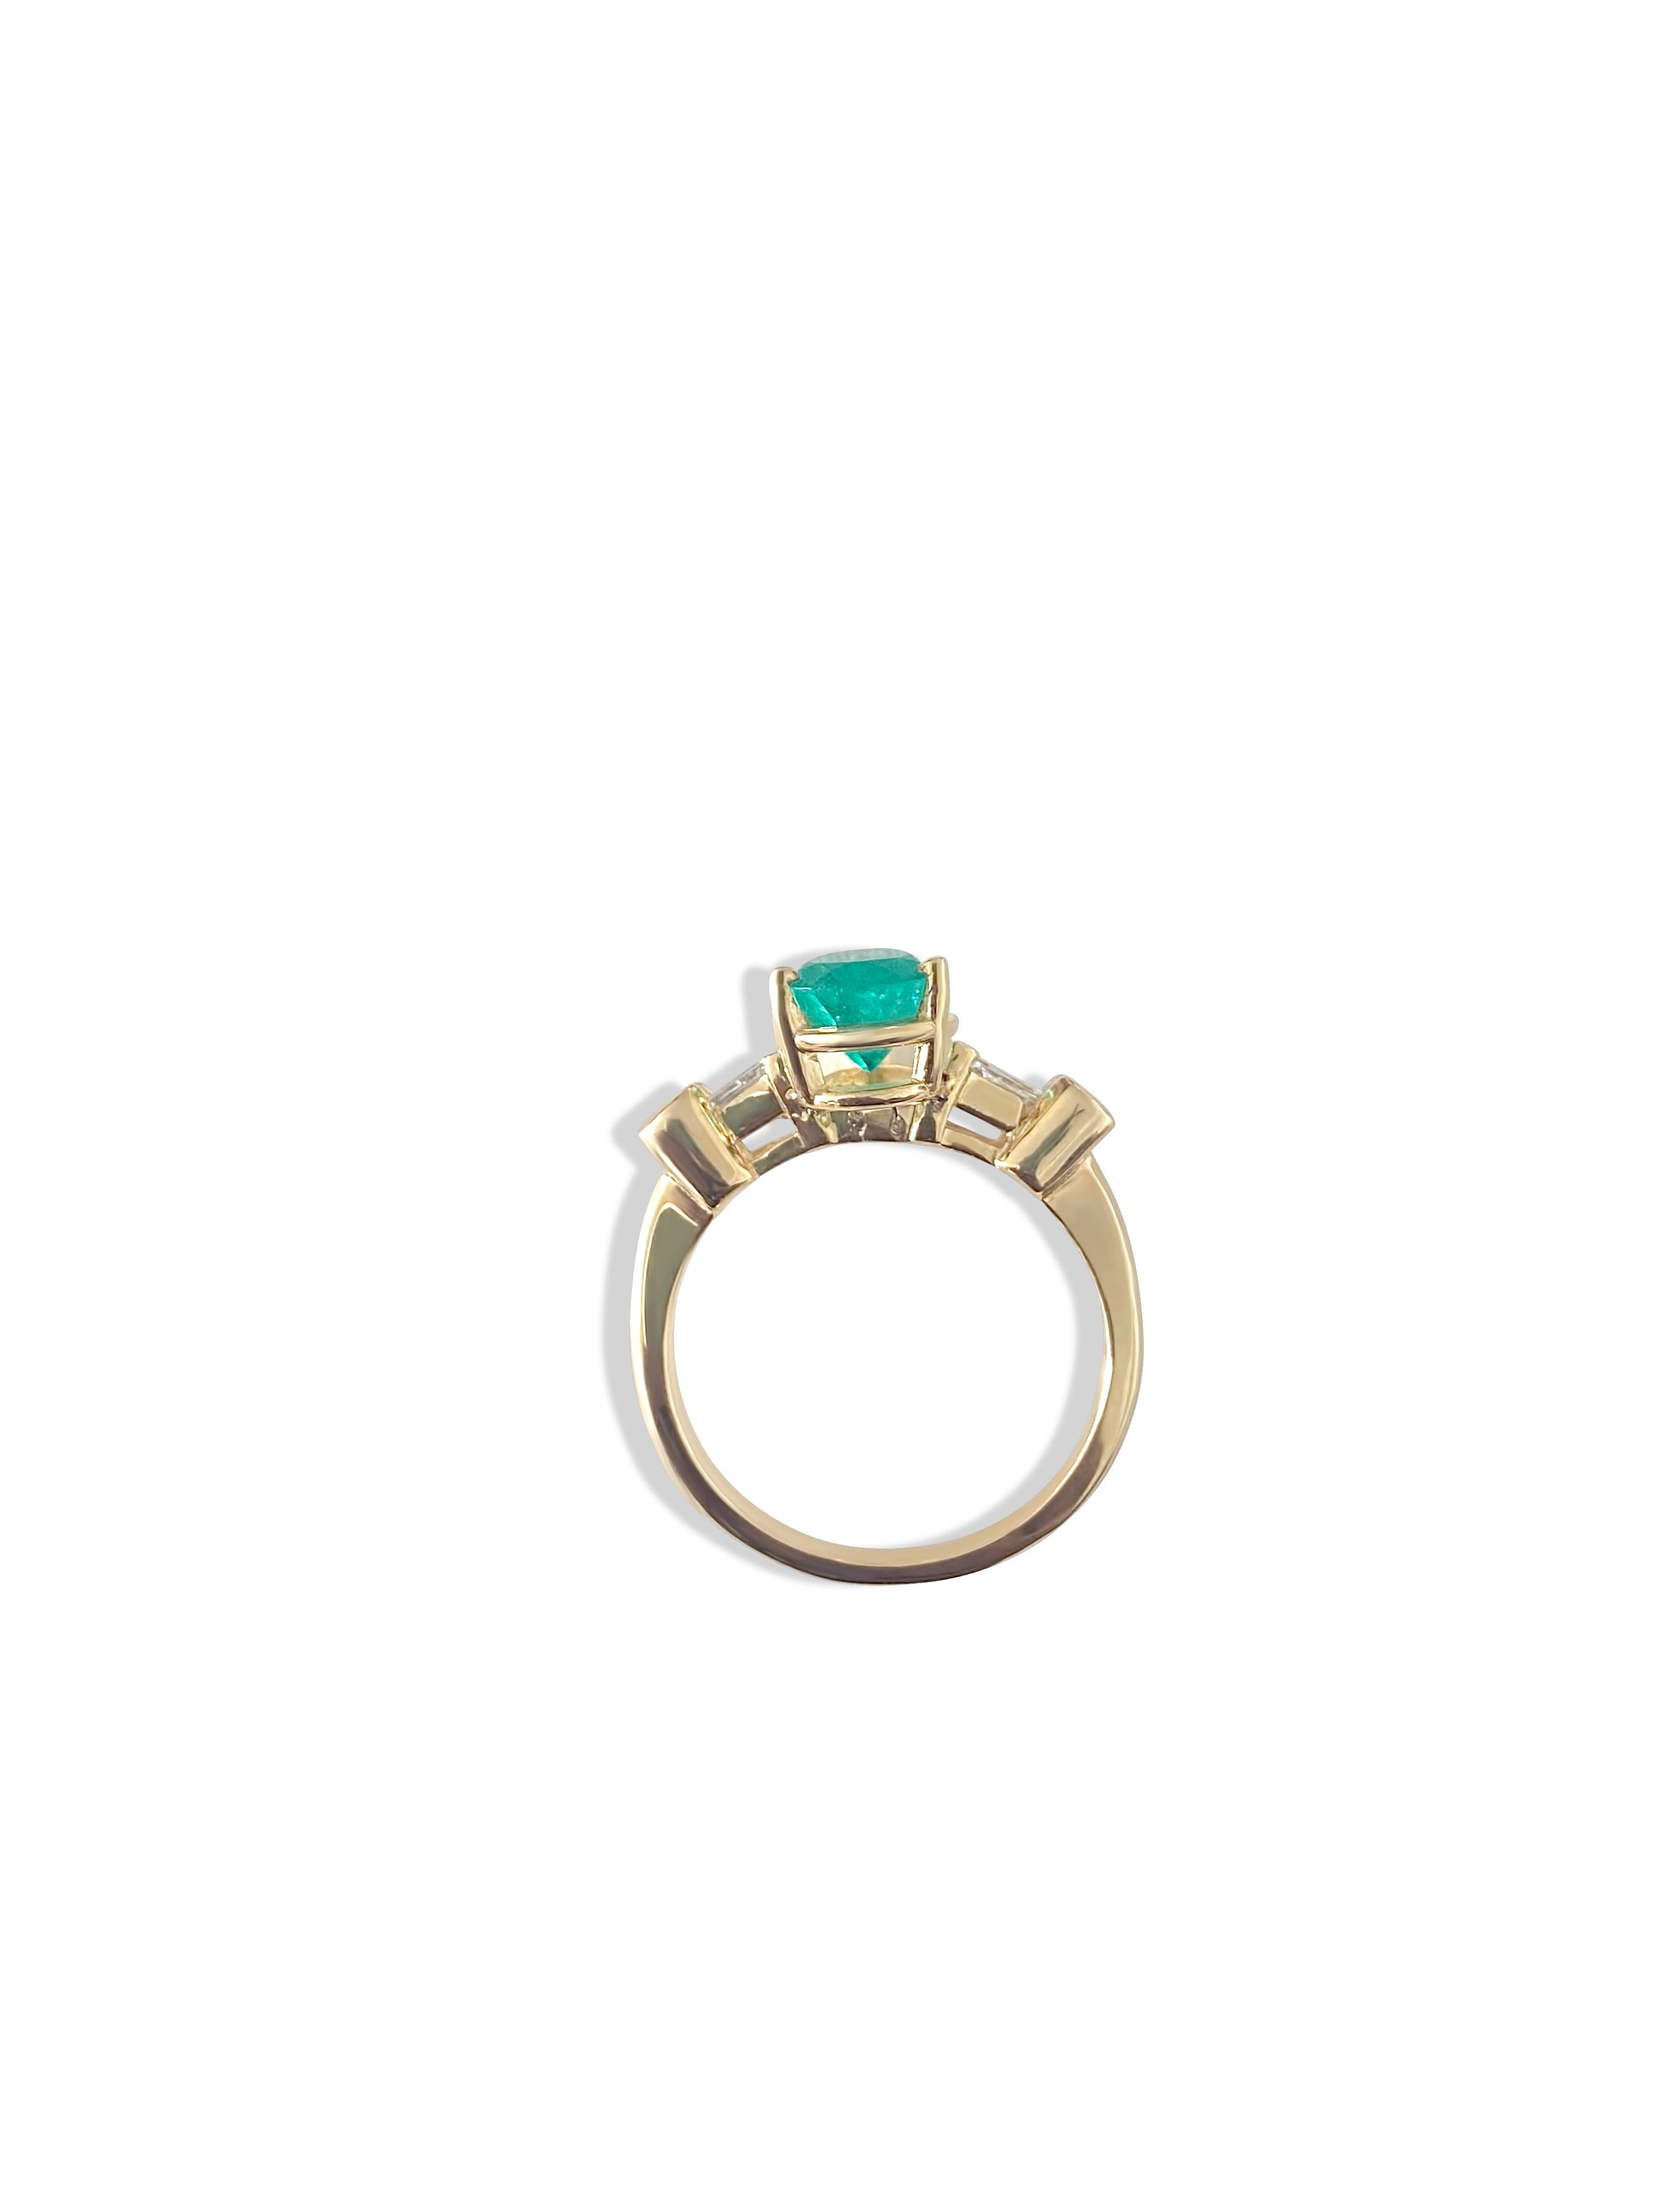 Women's or Men's Vintage 2.30 Carat Emerald and Diamond Cocktail Ring For Sale